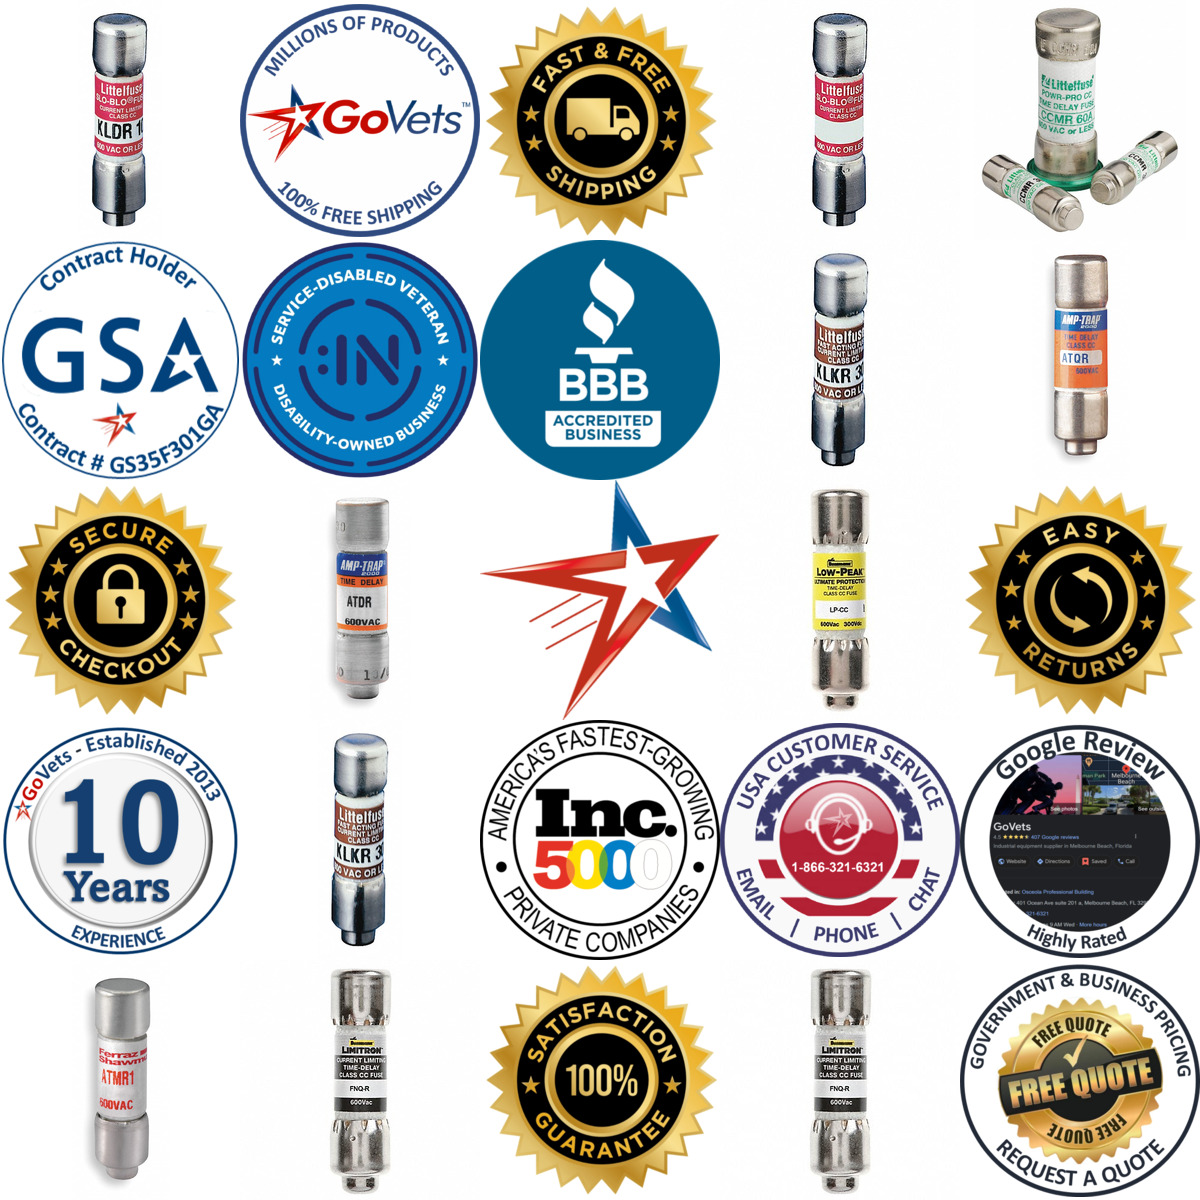 A selection of Class cc Fuses products on GoVets